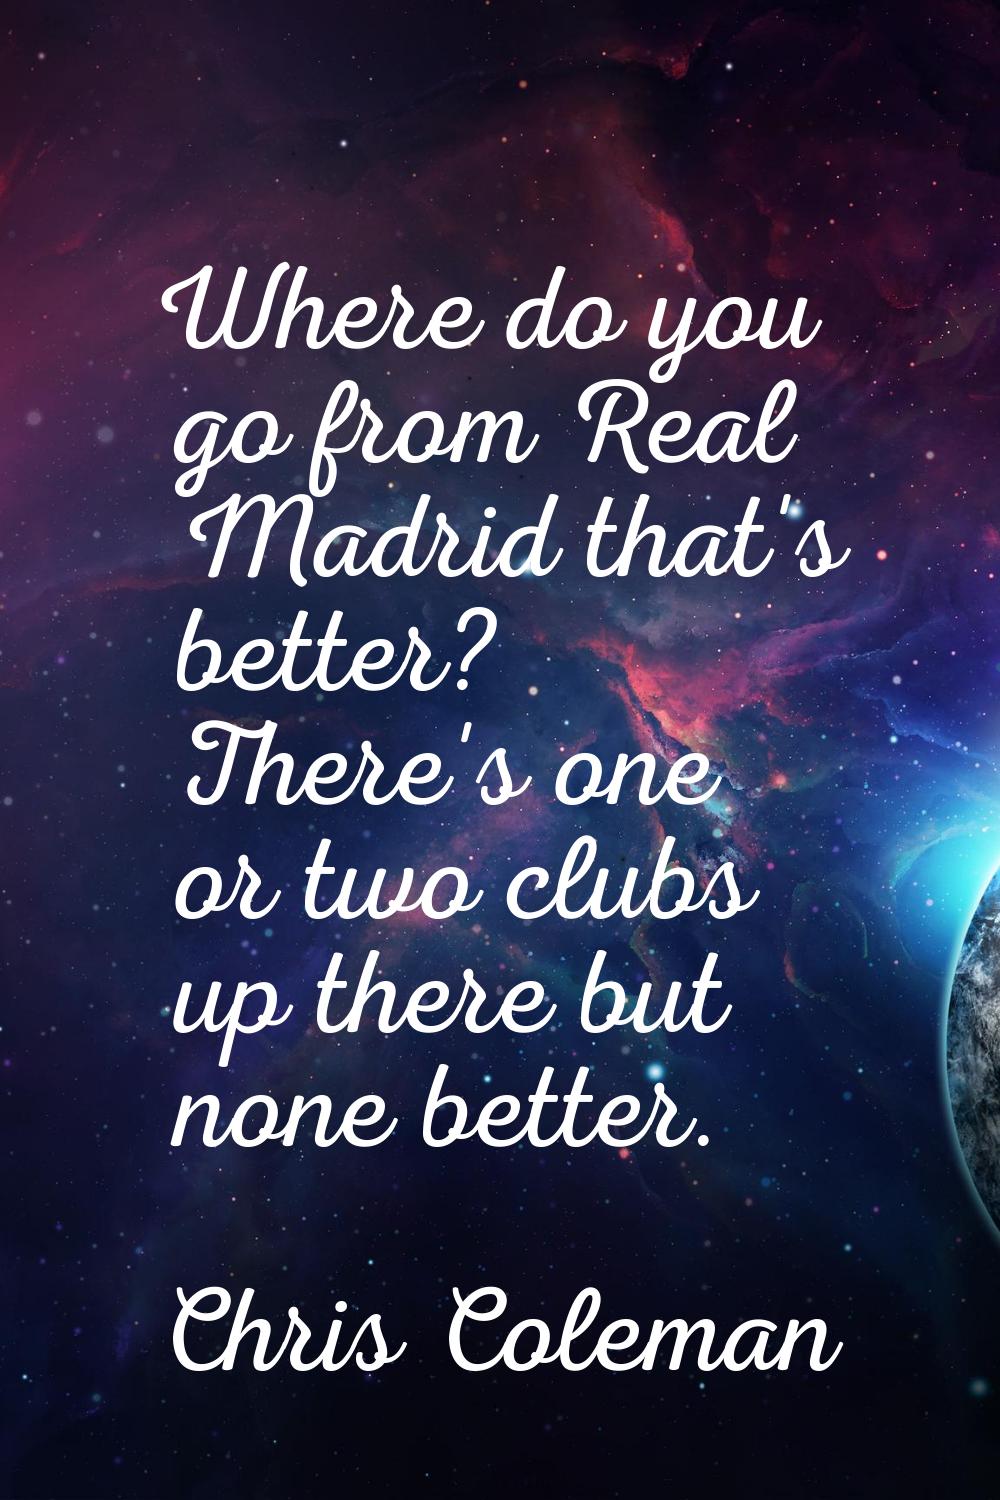 Where do you go from Real Madrid that's better? There's one or two clubs up there but none better.